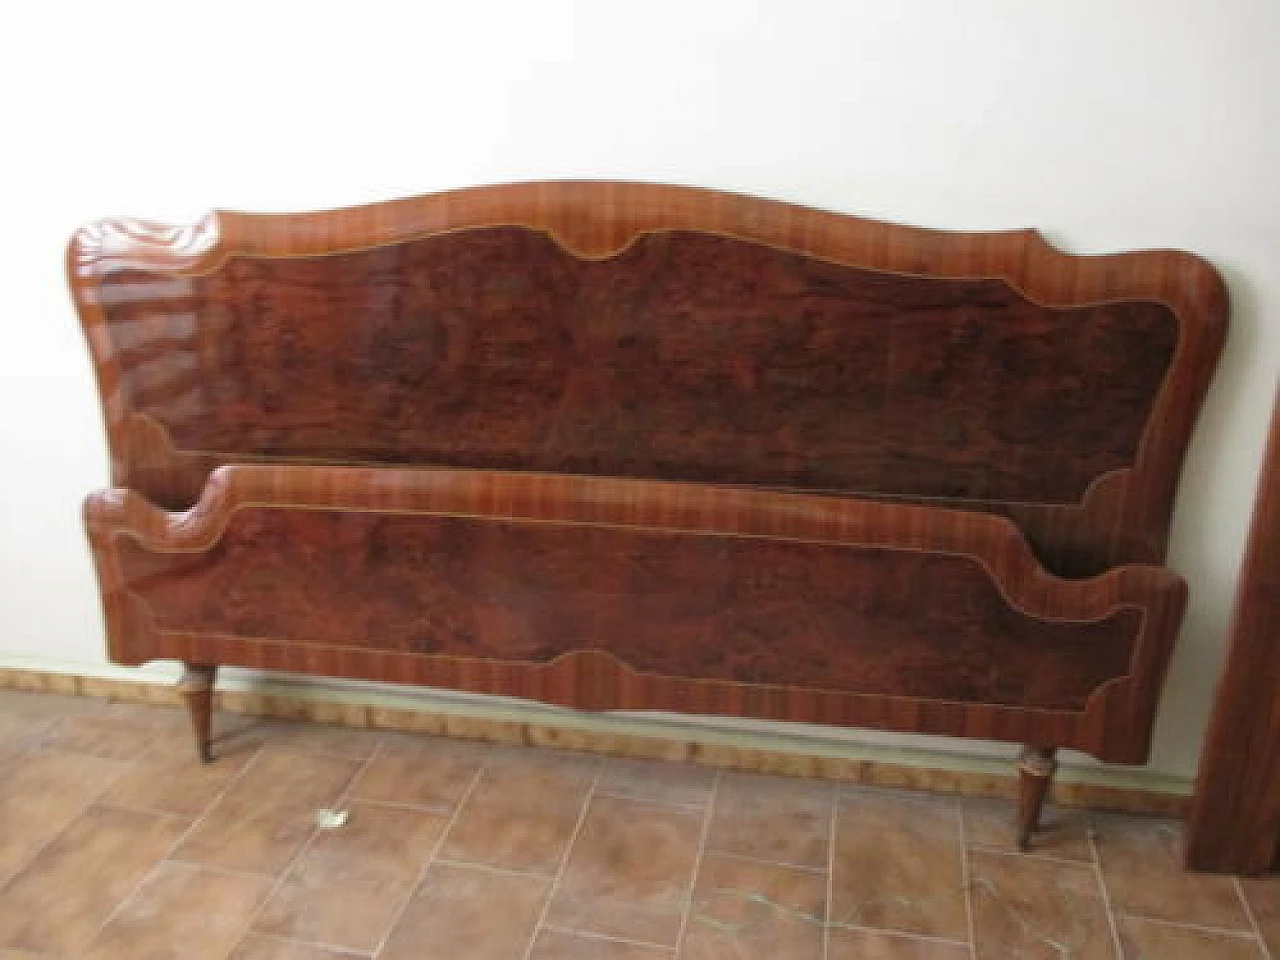 Rosewood double bed with inlays, 1950s 1330785